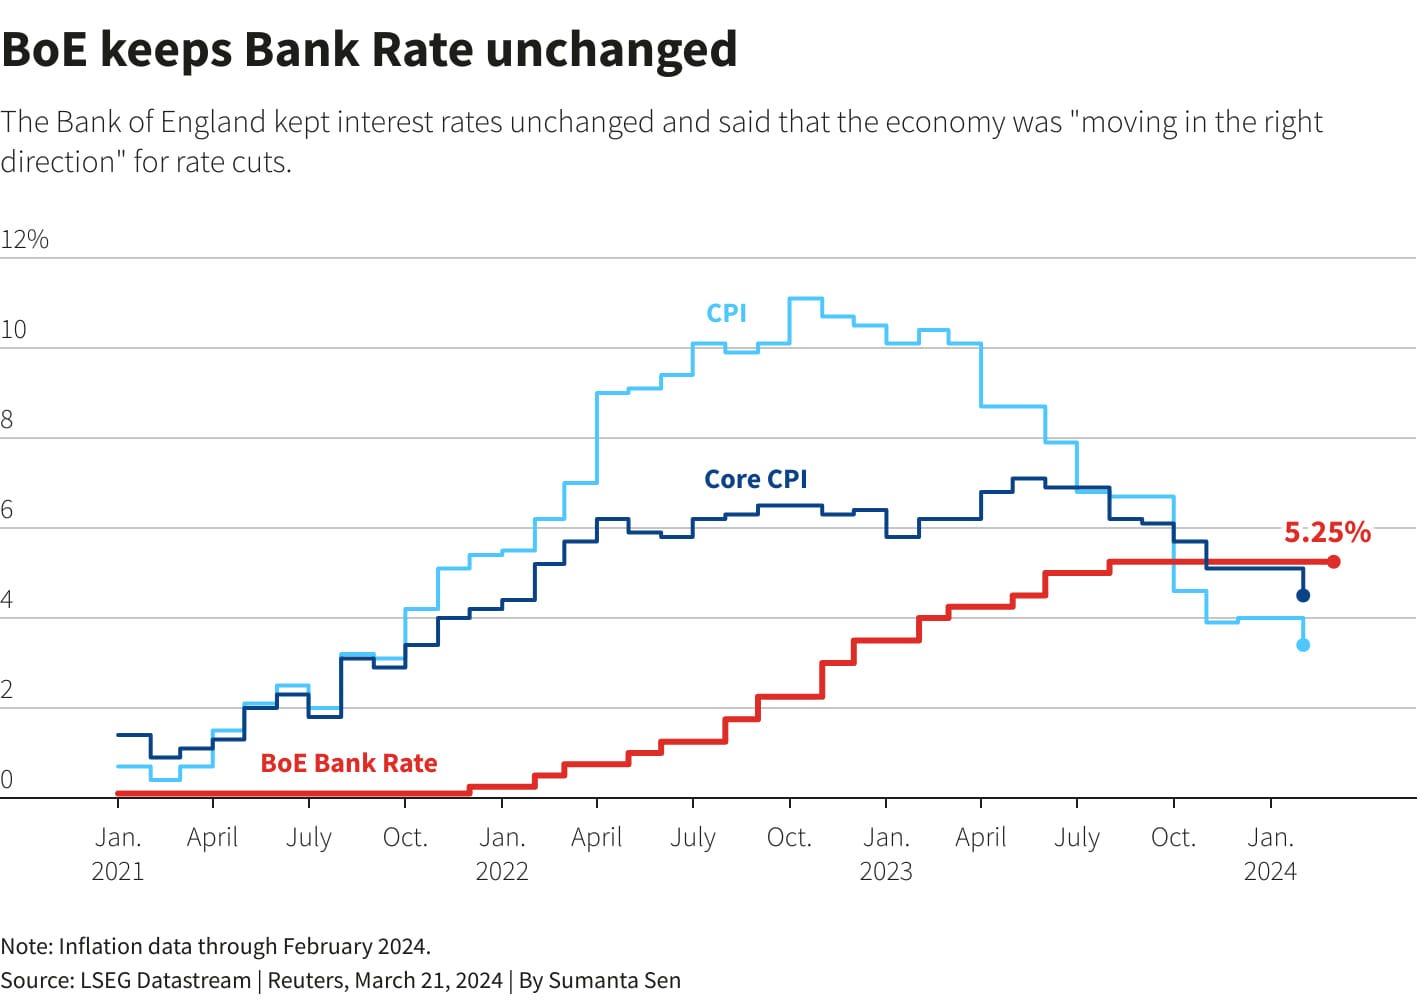 Có thể là hình ảnh về văn bản cho biết 'BoE keeps Bank Rate unchanged The Bank of England kept interest rates unchanged and said that the economy was "moving in the right direction" for rate cuts. 12% 10 CPI Core CPI 5.25% BoE Bank Rate Jan. 2021 April July Oct. Jan. 2022 April July Oct. Note: Inflation data through February 2024. Source: LSEG Datastream Reuters, March 21, 2024 By Sumanta Sen Jan. 2023 April July Oct. Jan. 2024'